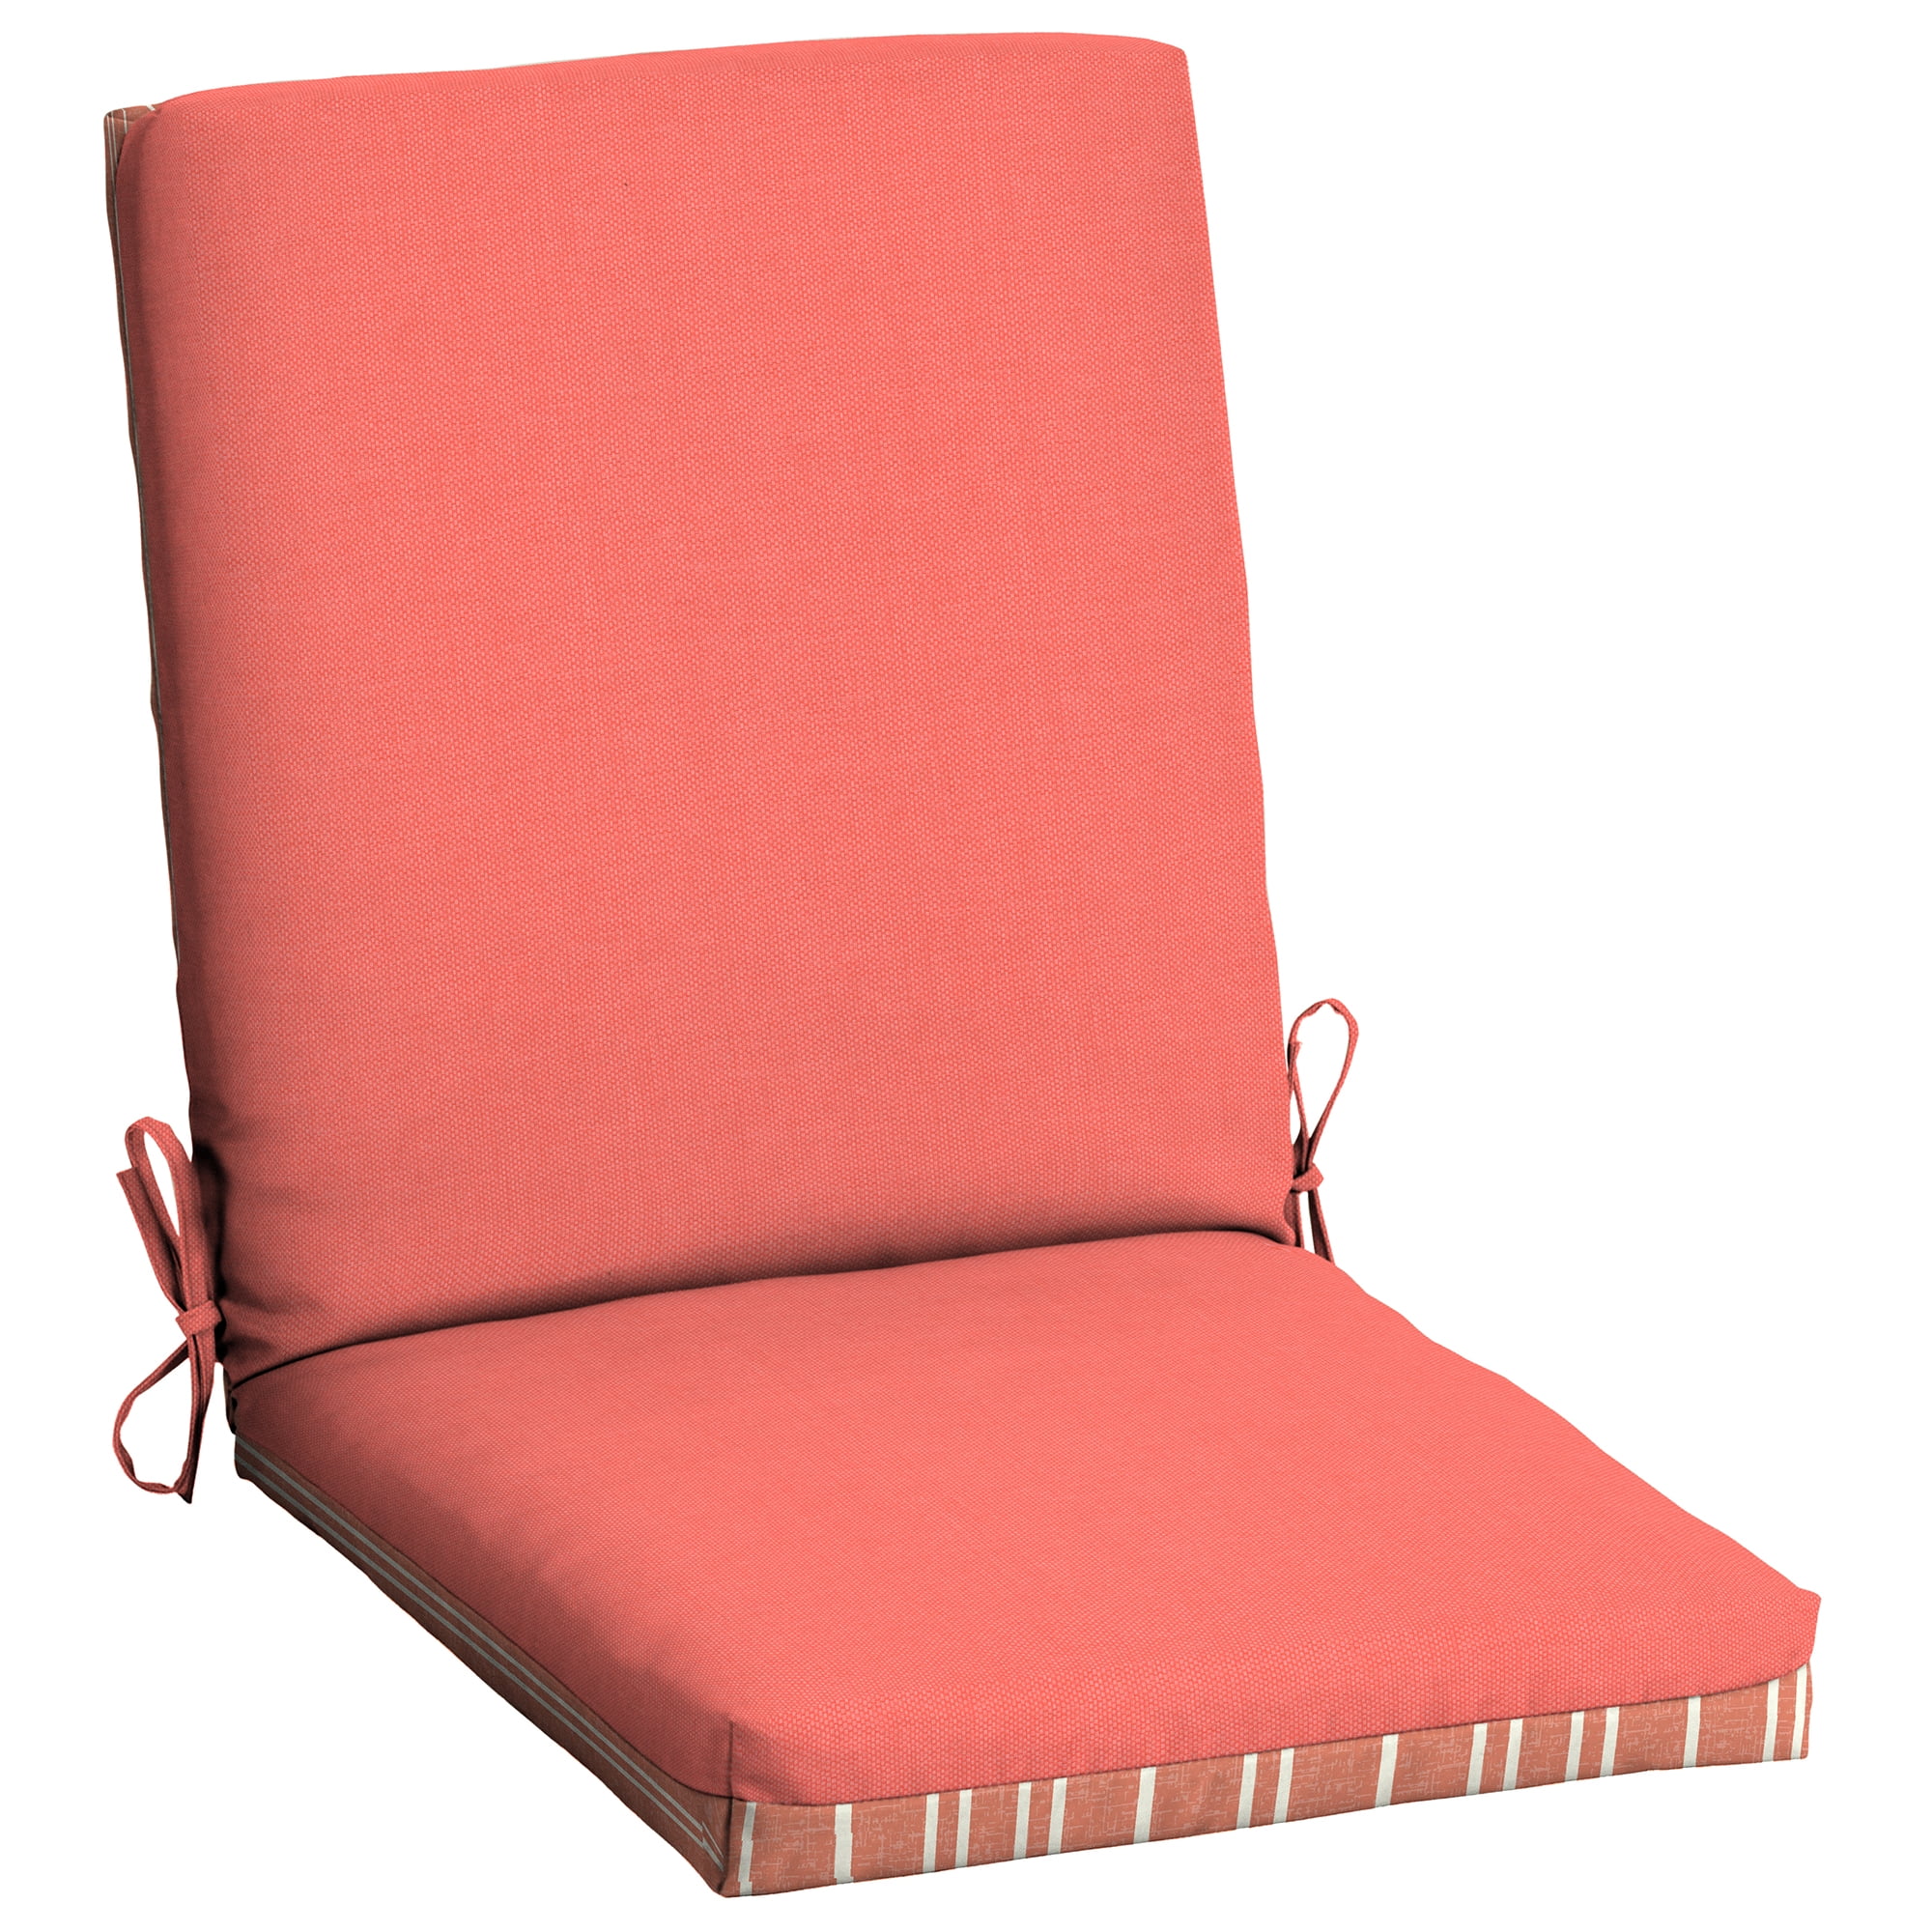 Mainstays 43 x 20 Solid Tan Rectangle Patio Chair Cushion, 1 Piece 